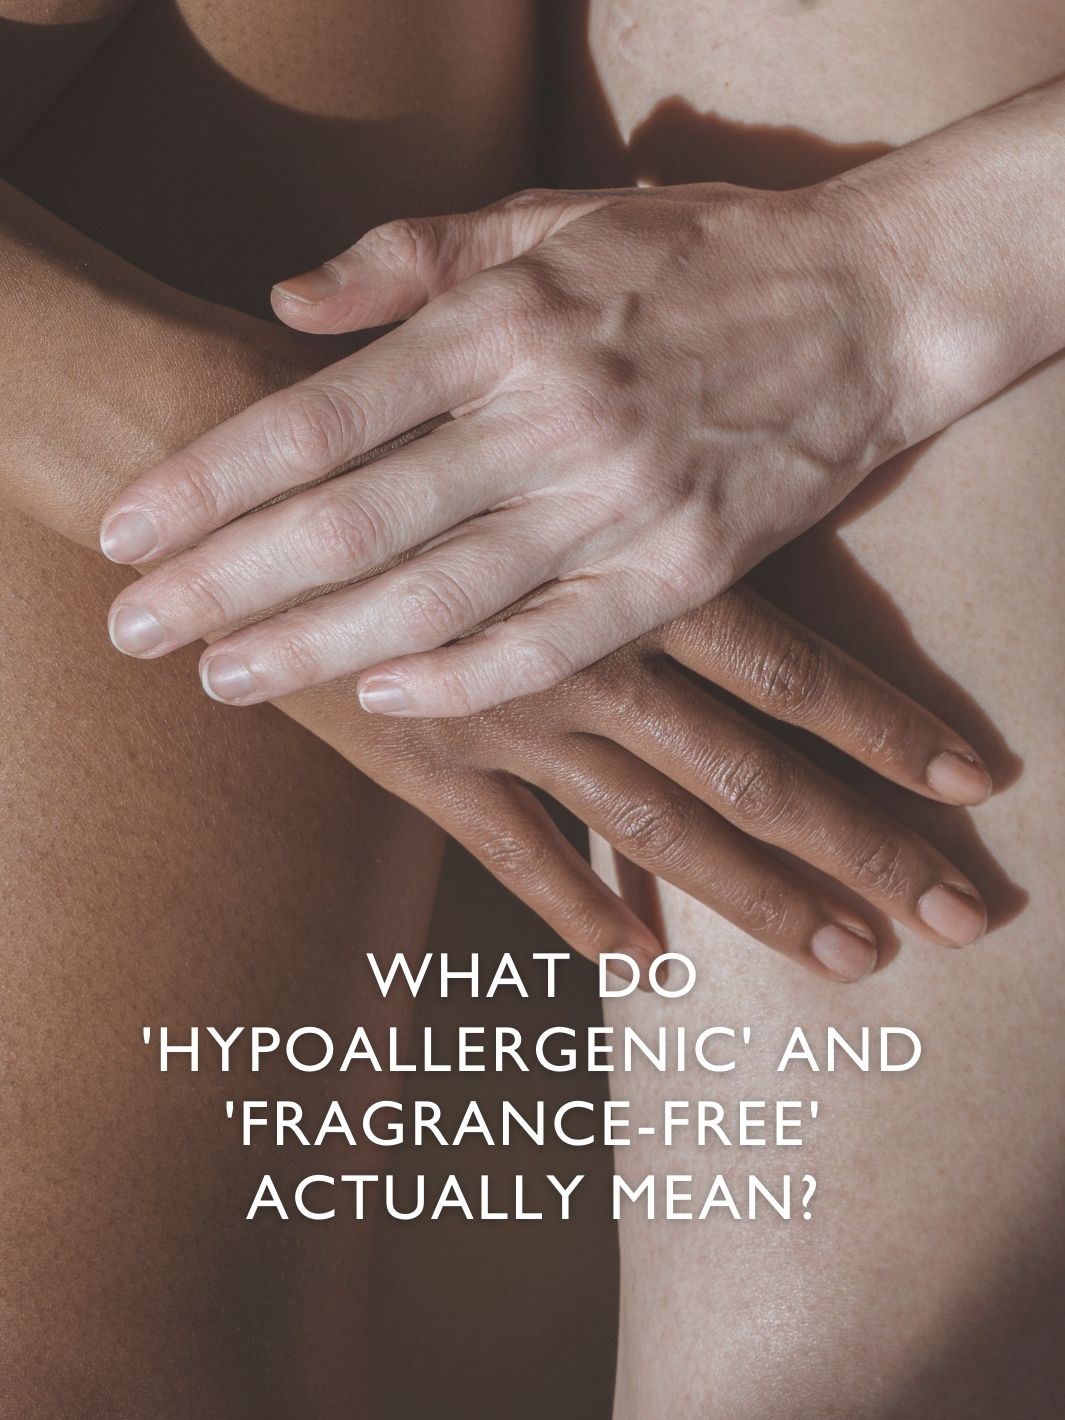 ❓What Do Fragrance-Free & Hypoallergenic Means